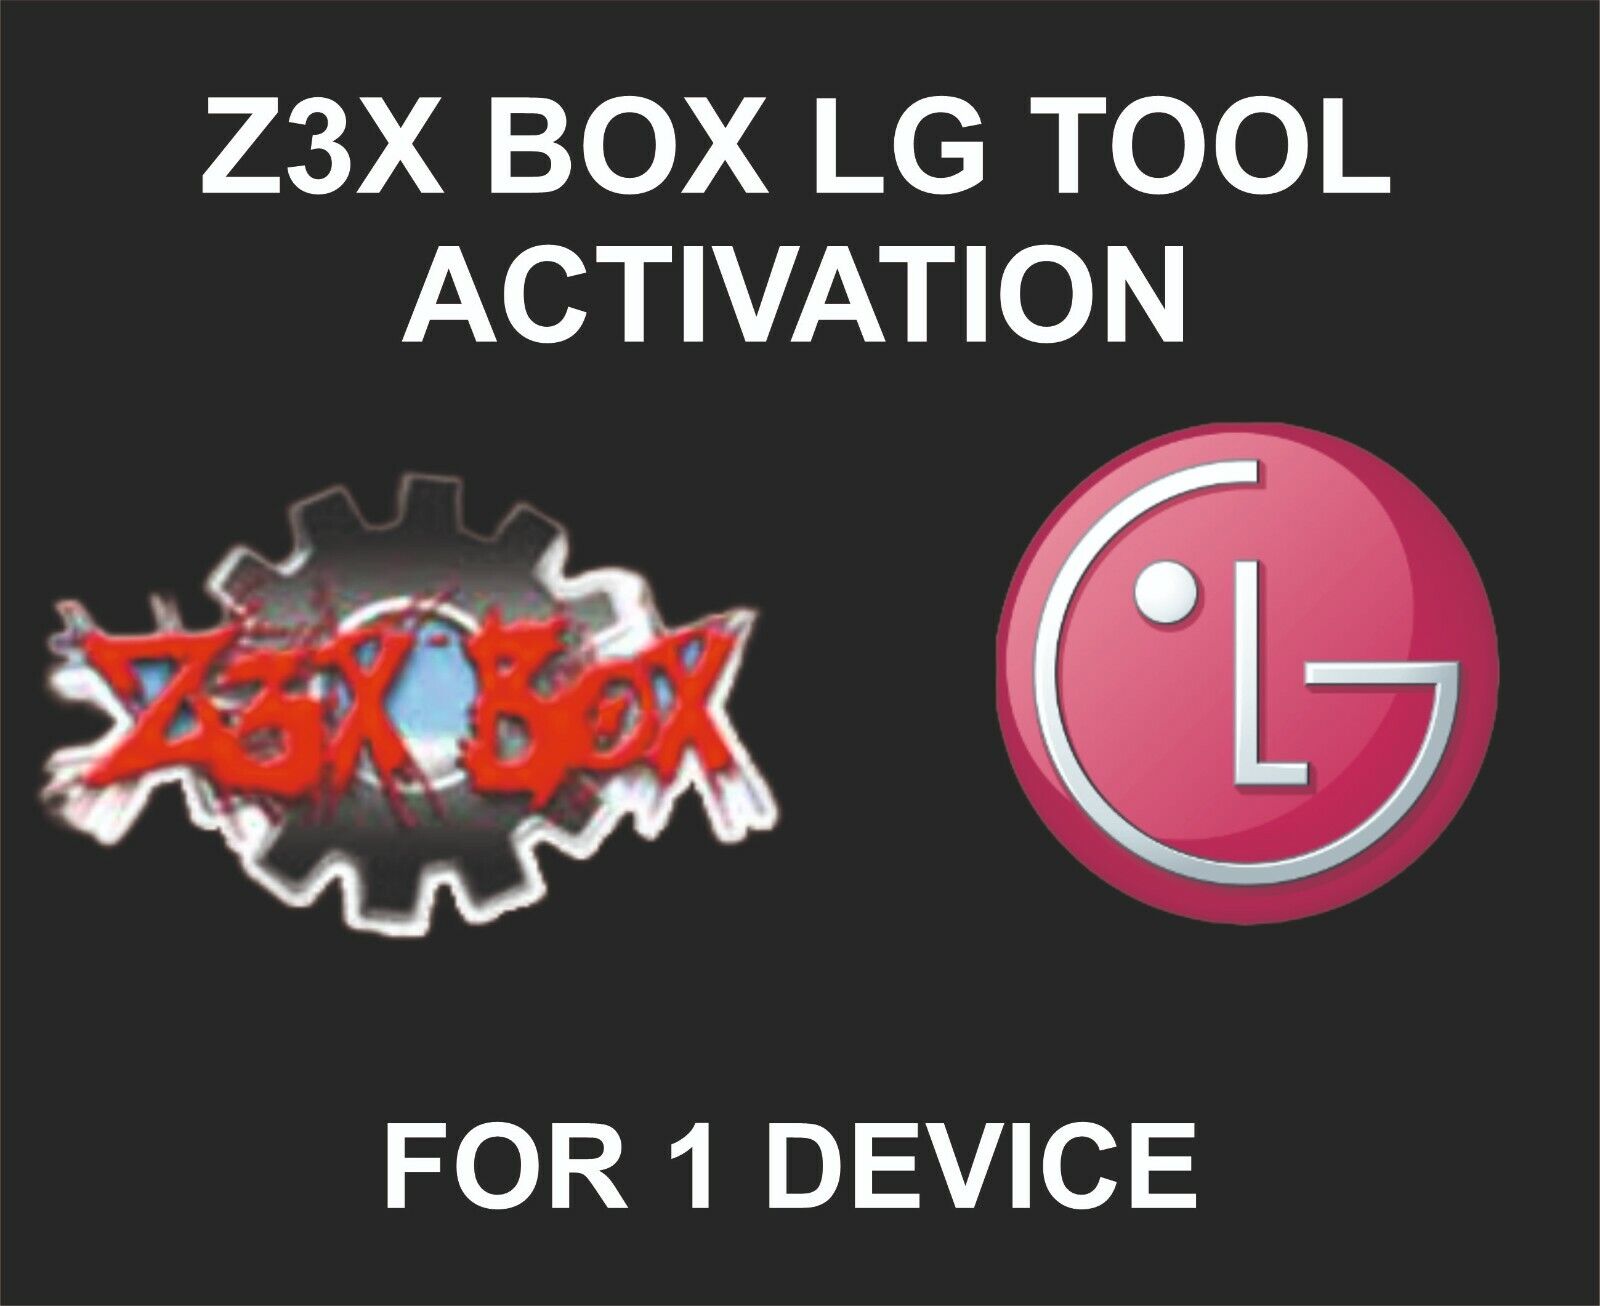 Z3x Box Lg Tool Activation, For 1 Device